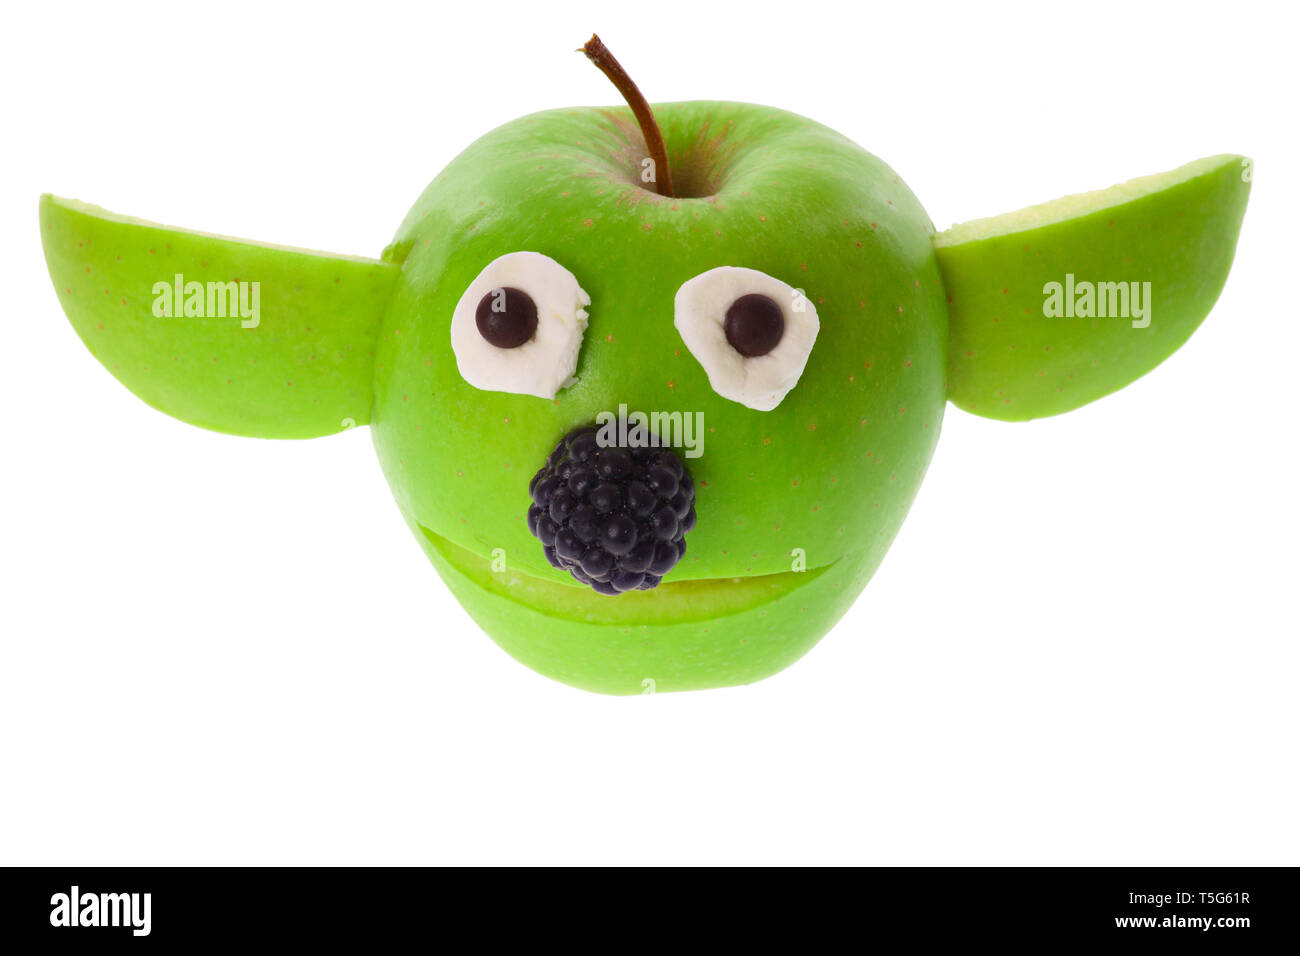 Funny apple yoda, isolated on a white background Stock Photo